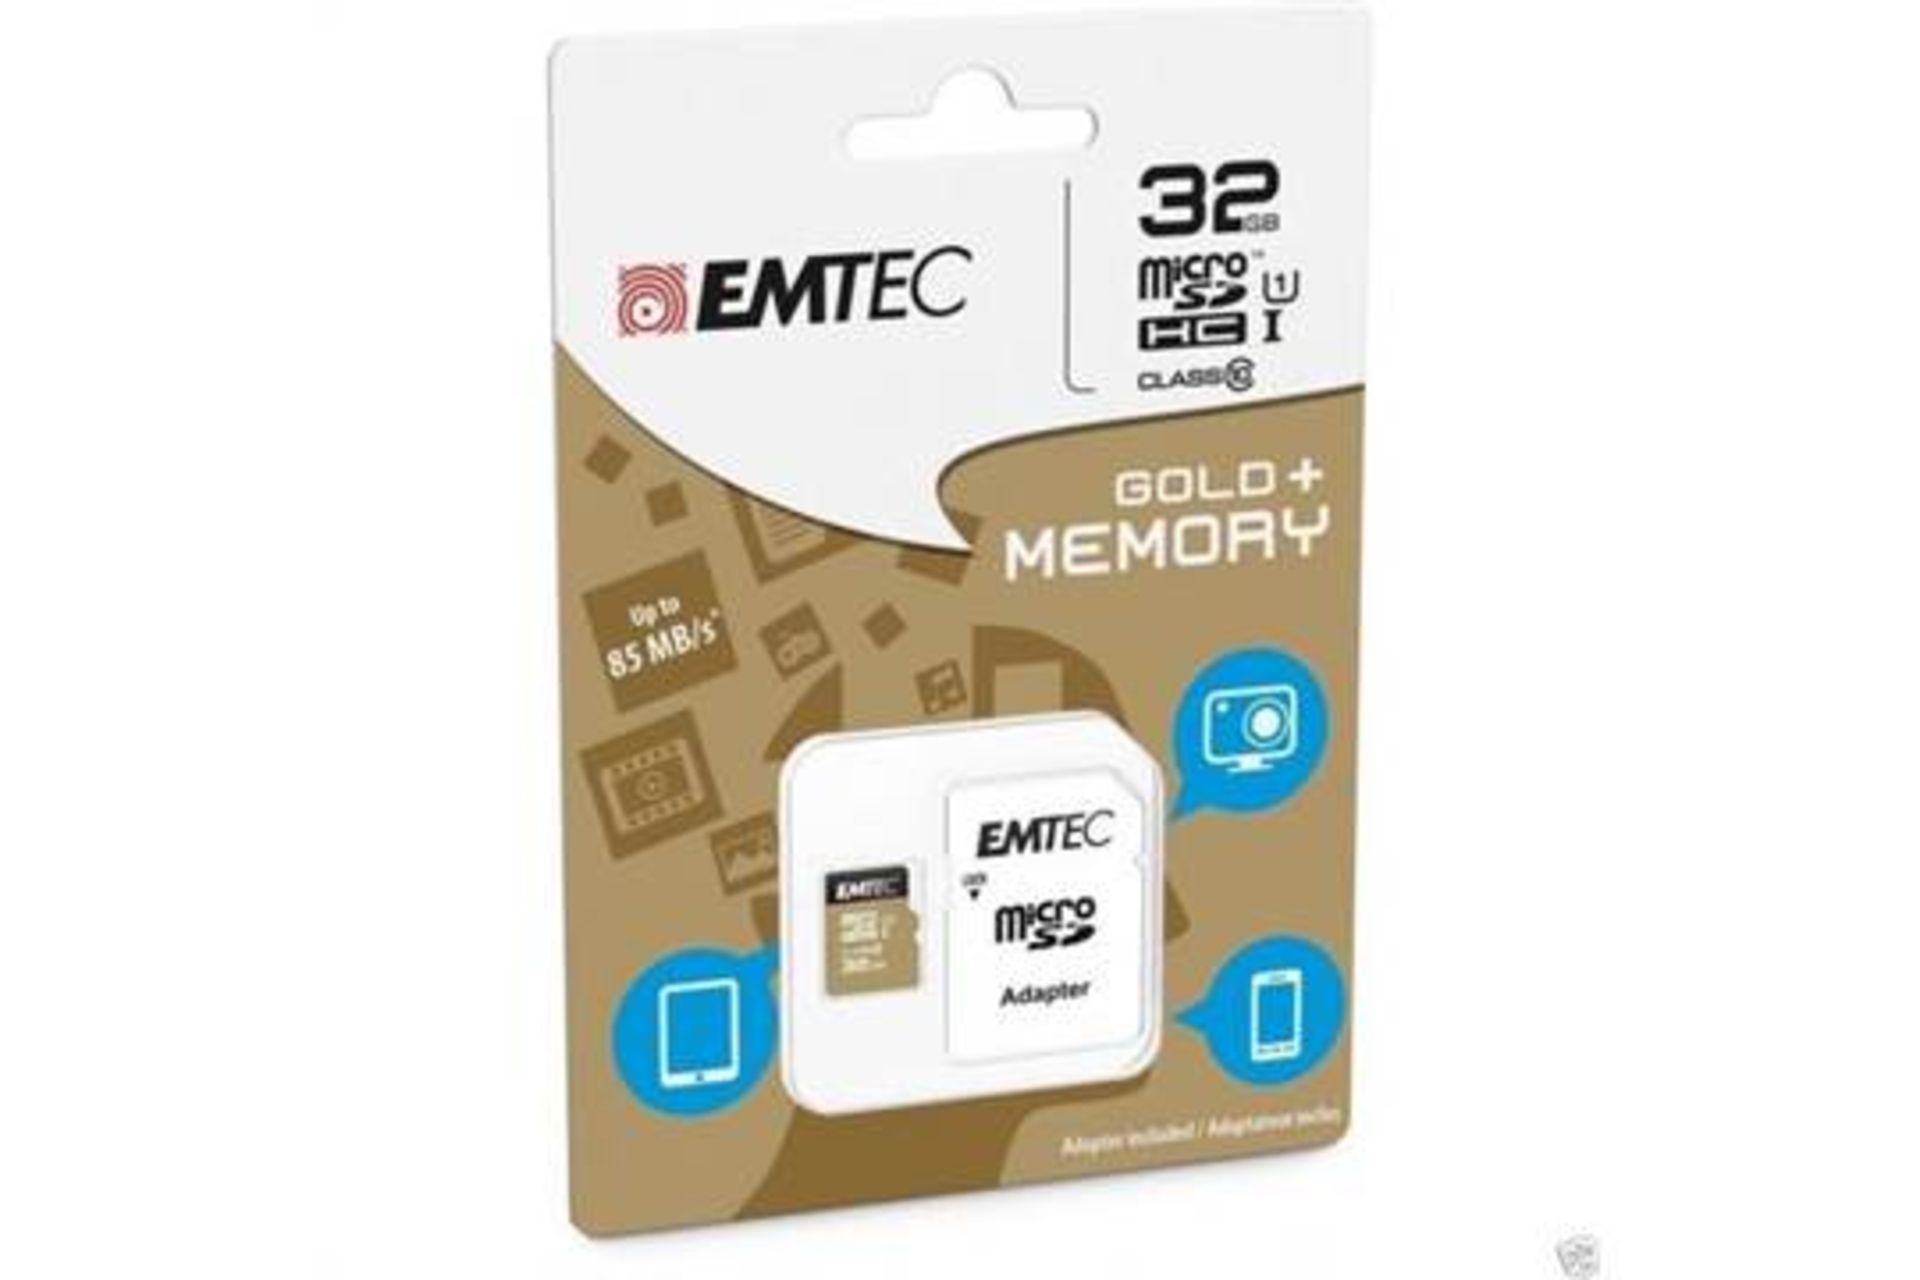 1x Emtec Gold + Memory 32GB Micro SD card with SD card adaptor, fits in Smart phones, tablets,